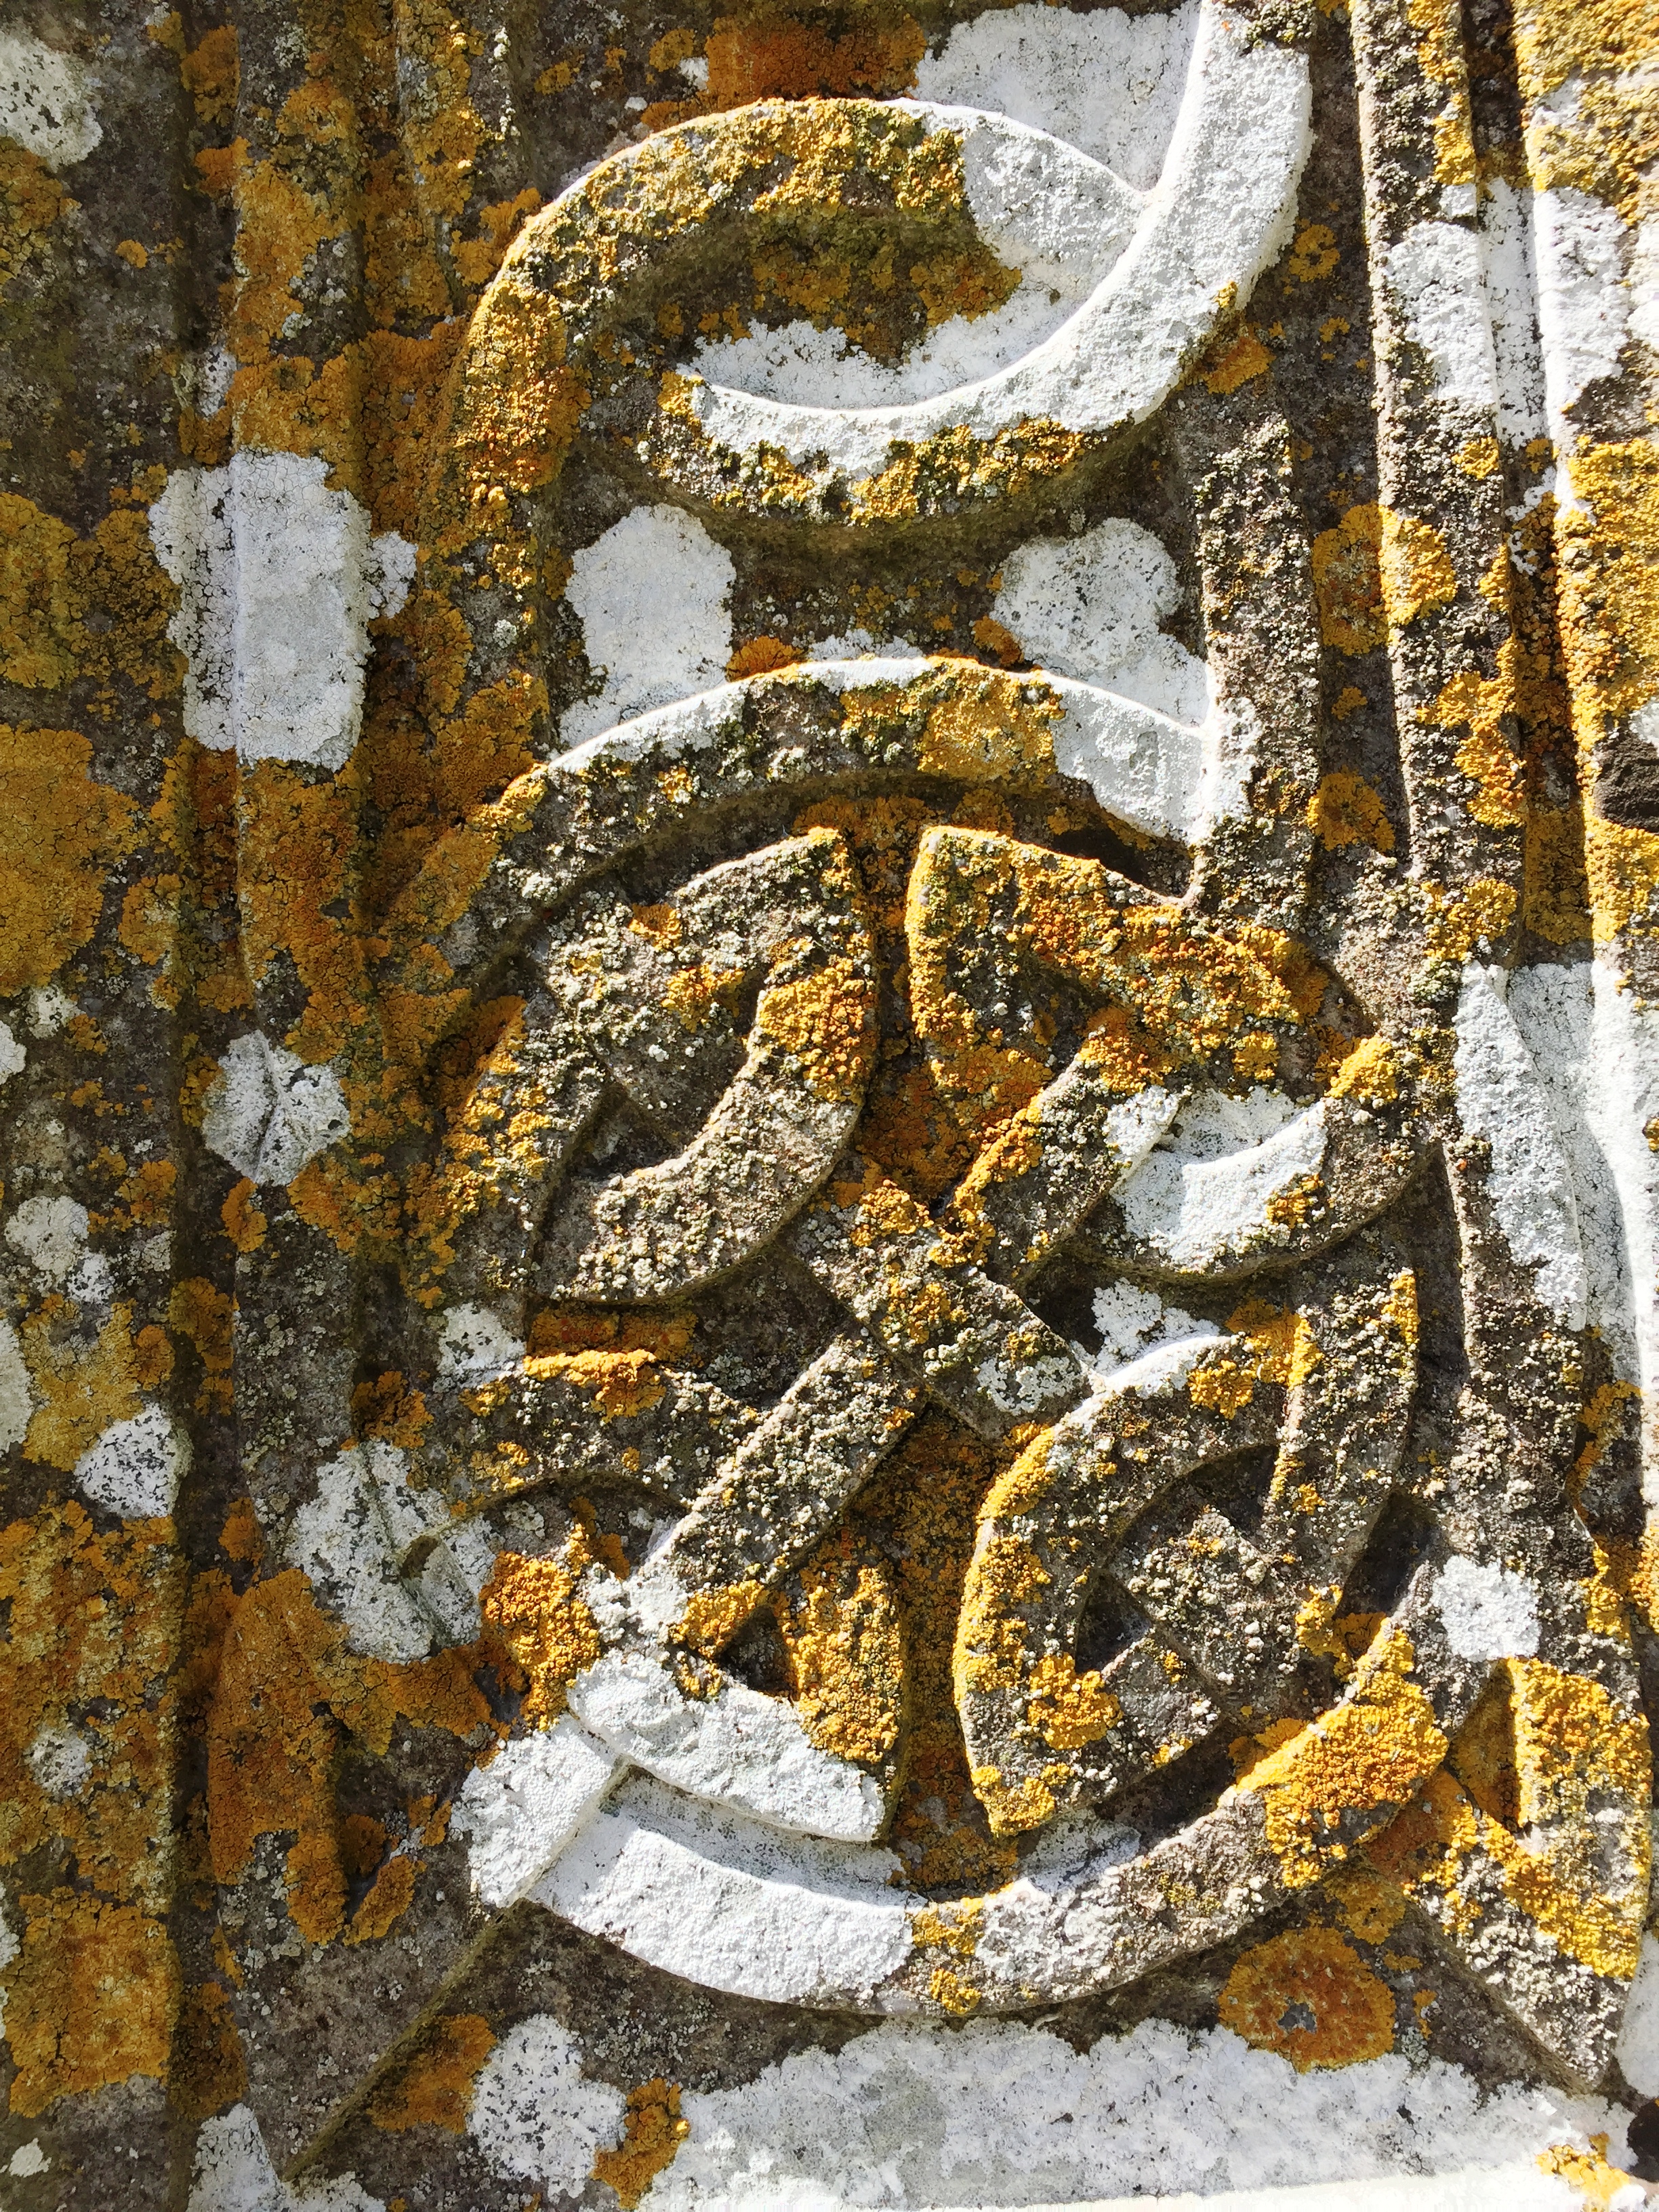 Lichen growth on one of the stone monuments at Monasterboice. Photo by Martha Clark.